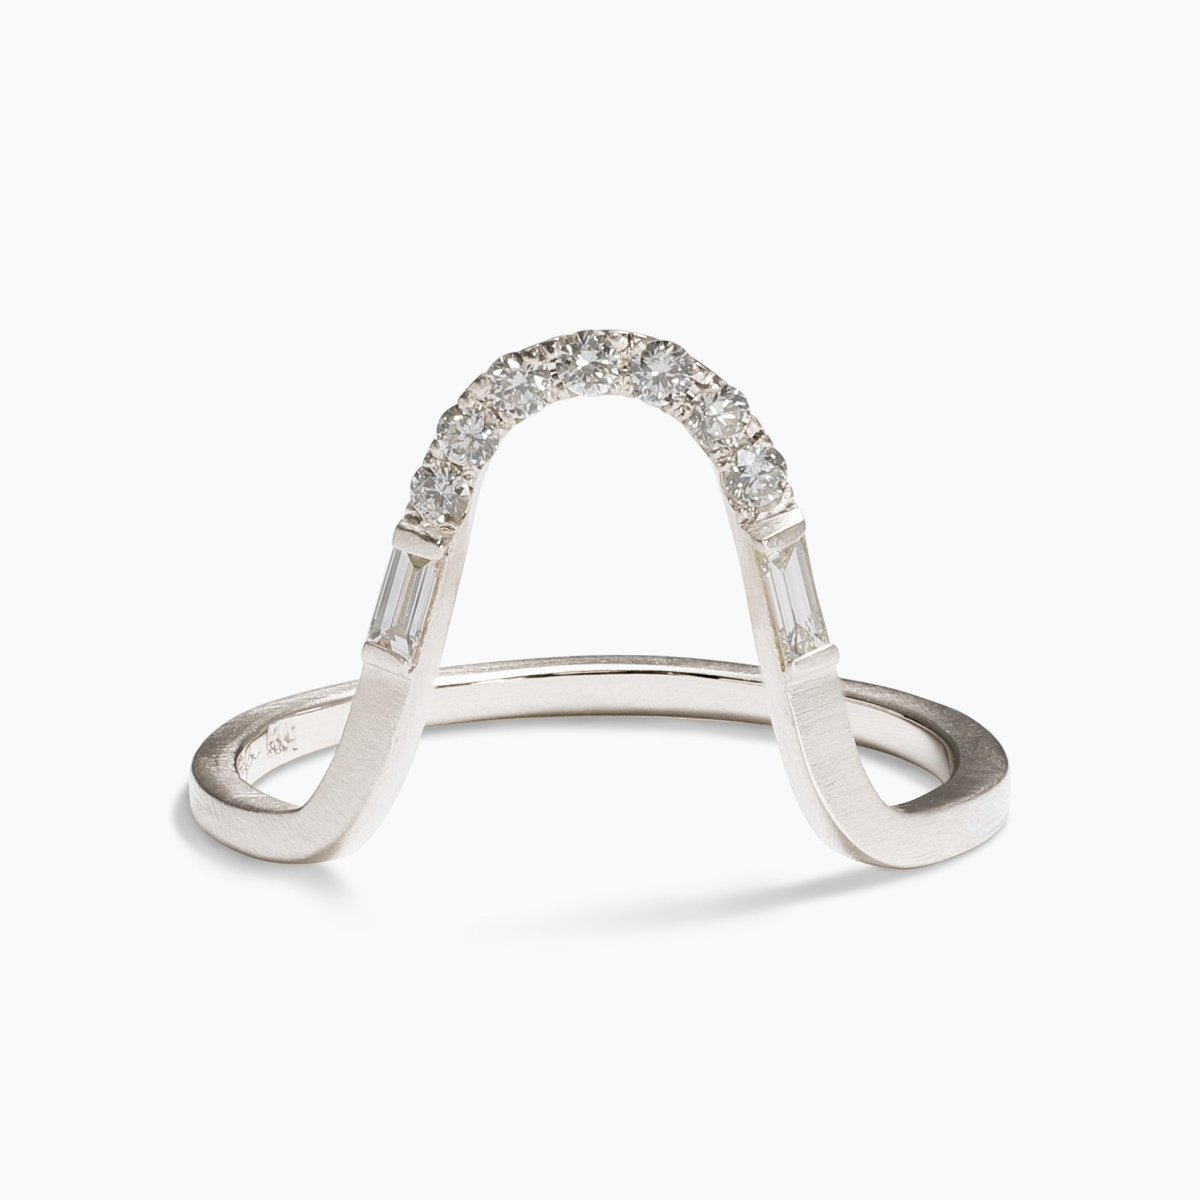 Arched stacking Levo ring. Features lab-grown diamonds in a pavé setting and a 14K recycled white gold band.